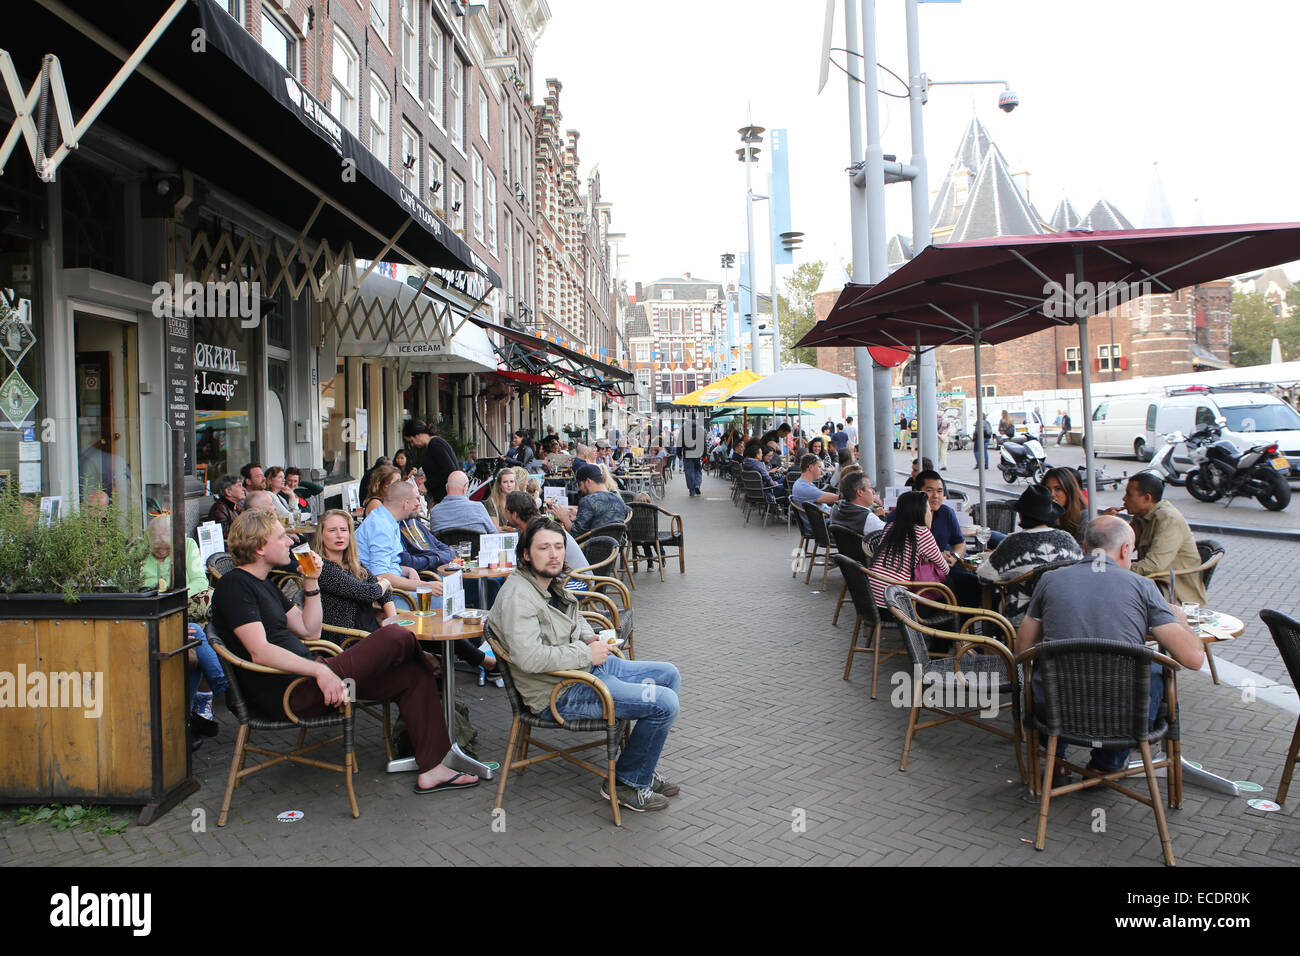 amsterdam outdoor cafe restaurant patio busy people Stock Photo